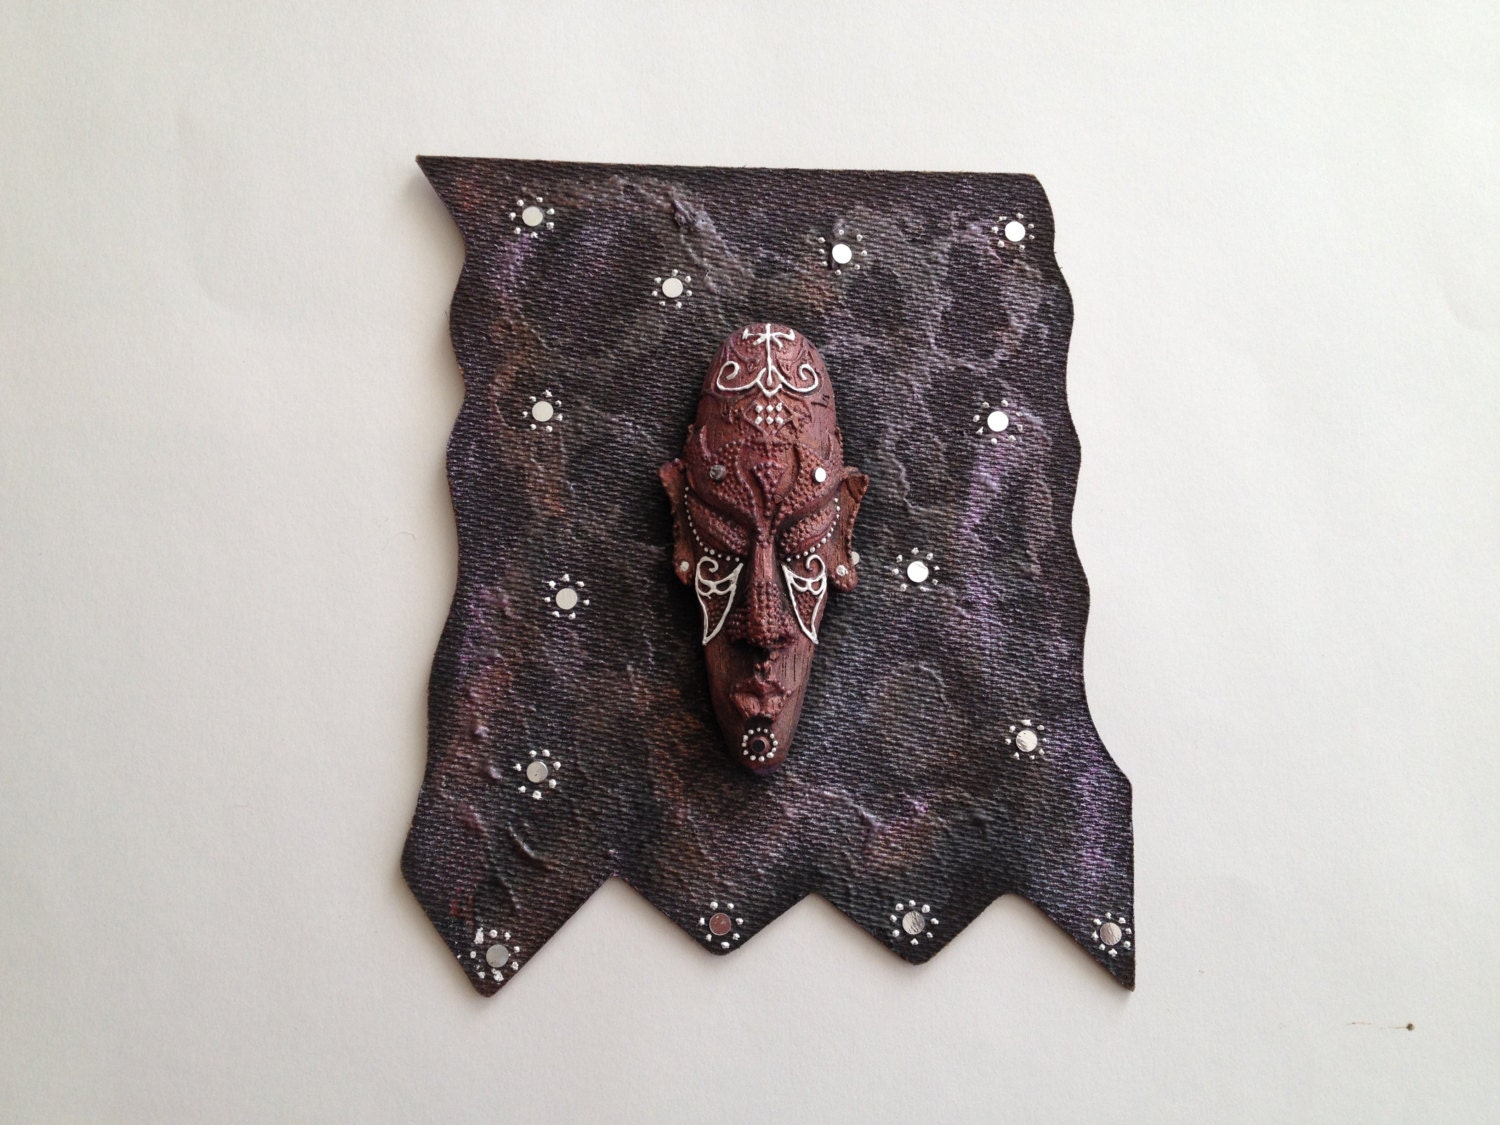 Multi media Mask- 3d Mask- decorated with acrylic paints